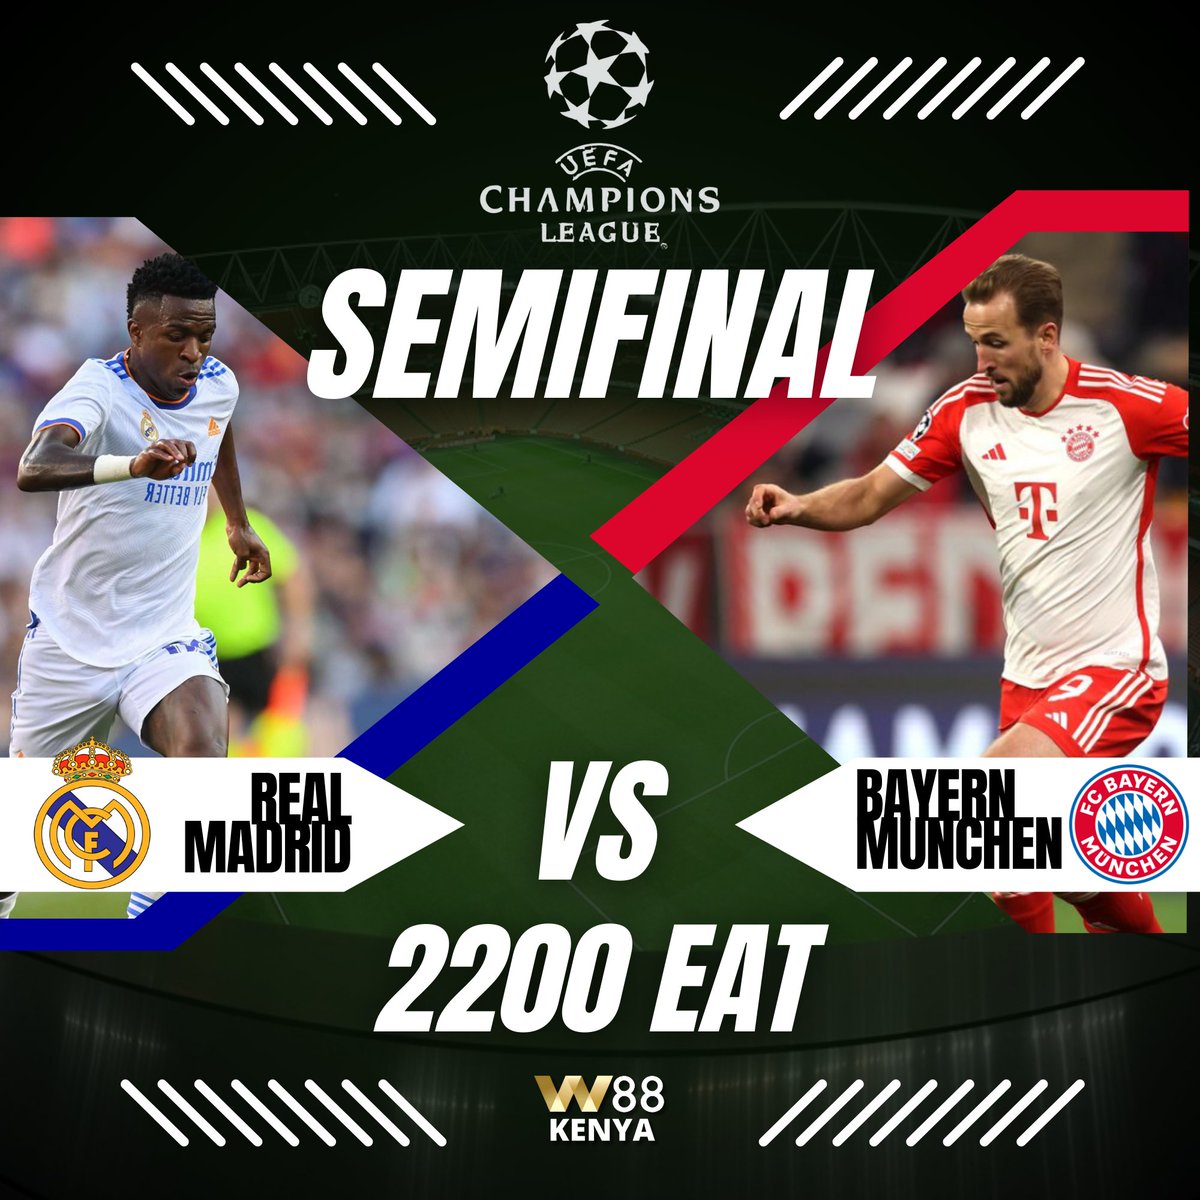 MATCH OF THE DAY!
one team has to make it to the finals and face Dortmund while another one has to go home. Make sure you watch this battle at 10pm and get to know which one will proceed to the next level
#JoinW88